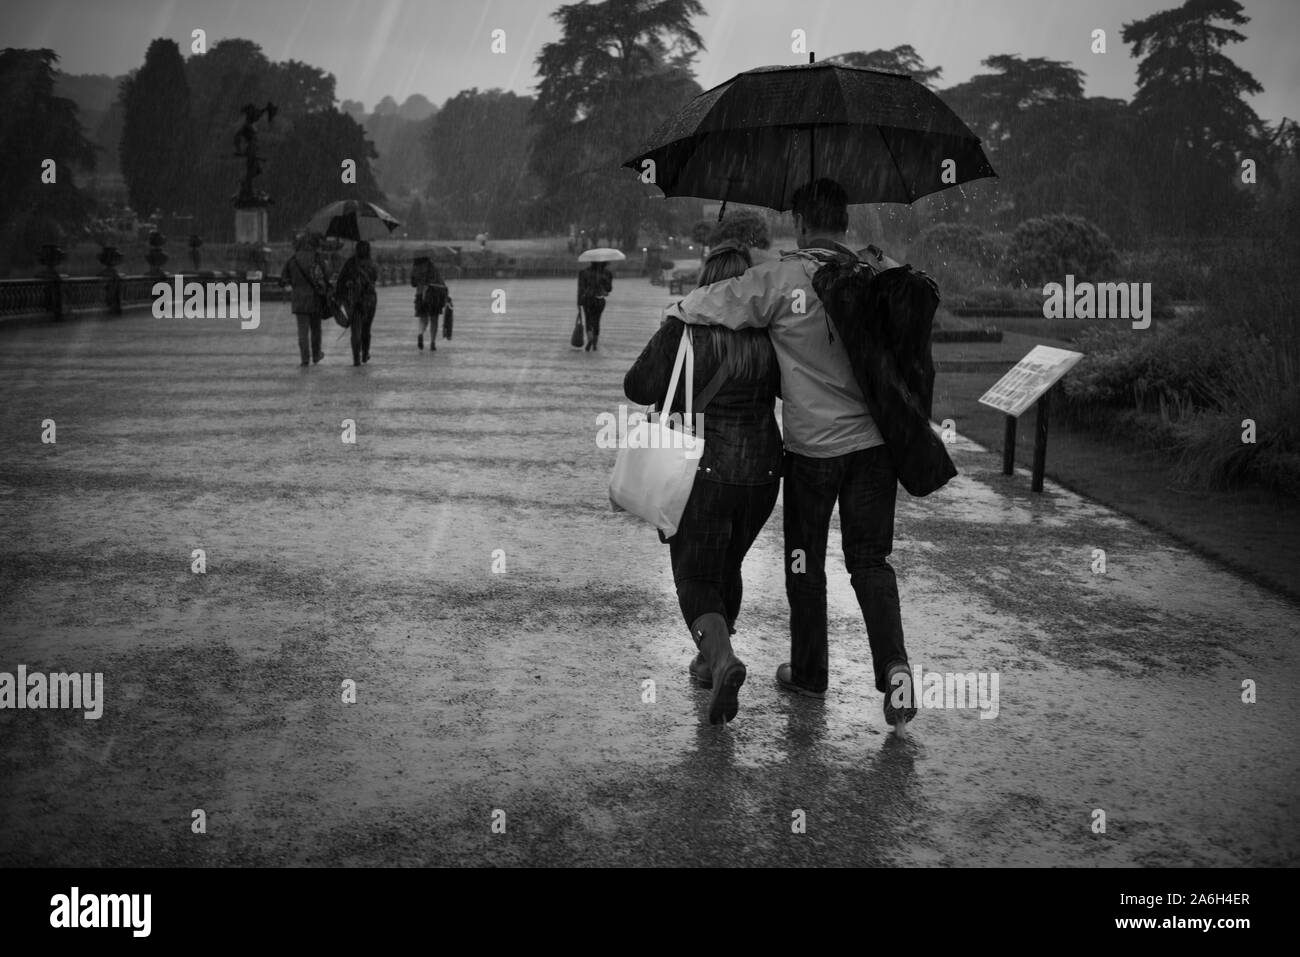 People cover under umbrella's at an outdoor music festival, raining, wet and cold but still enjoying the entertainment, Trentham Gardens, Stock Photo